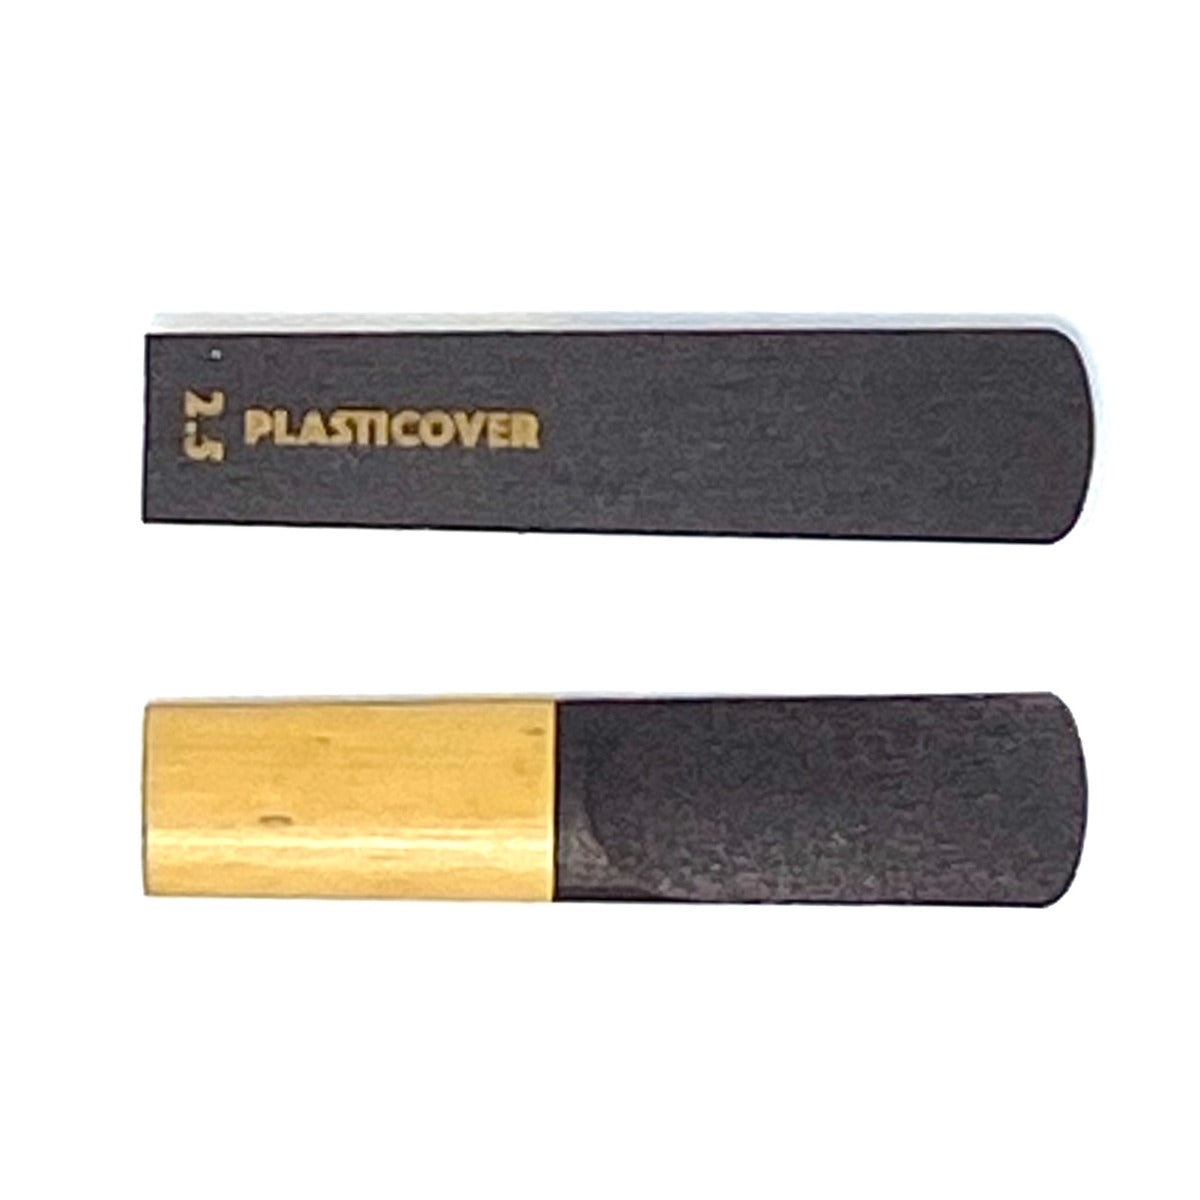 Plasticover by D'Addario, Tenor Saxophone Reeds